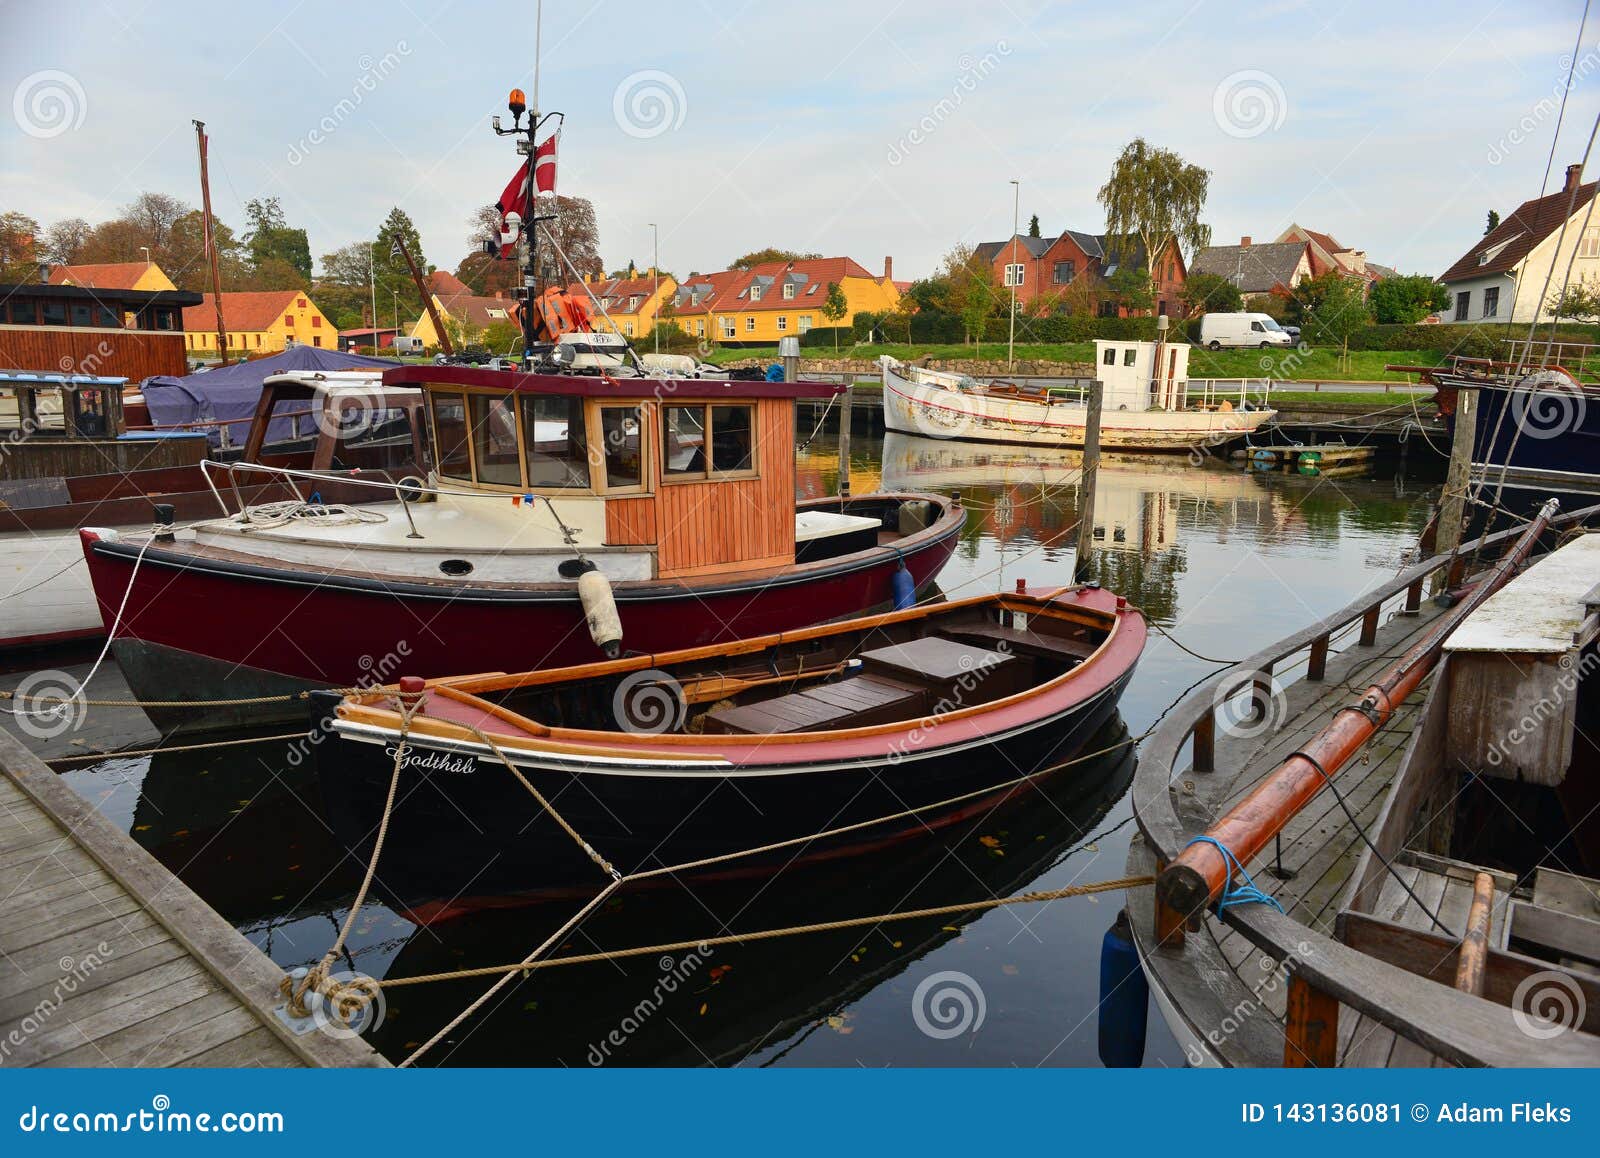 https://thumbs.dreamstime.com/z/old-wooden-danish-fish-boats-nakskov-denmark-bows-small-traditional-fishing-harbor-evening-light-yellow-houses-143136081.jpg